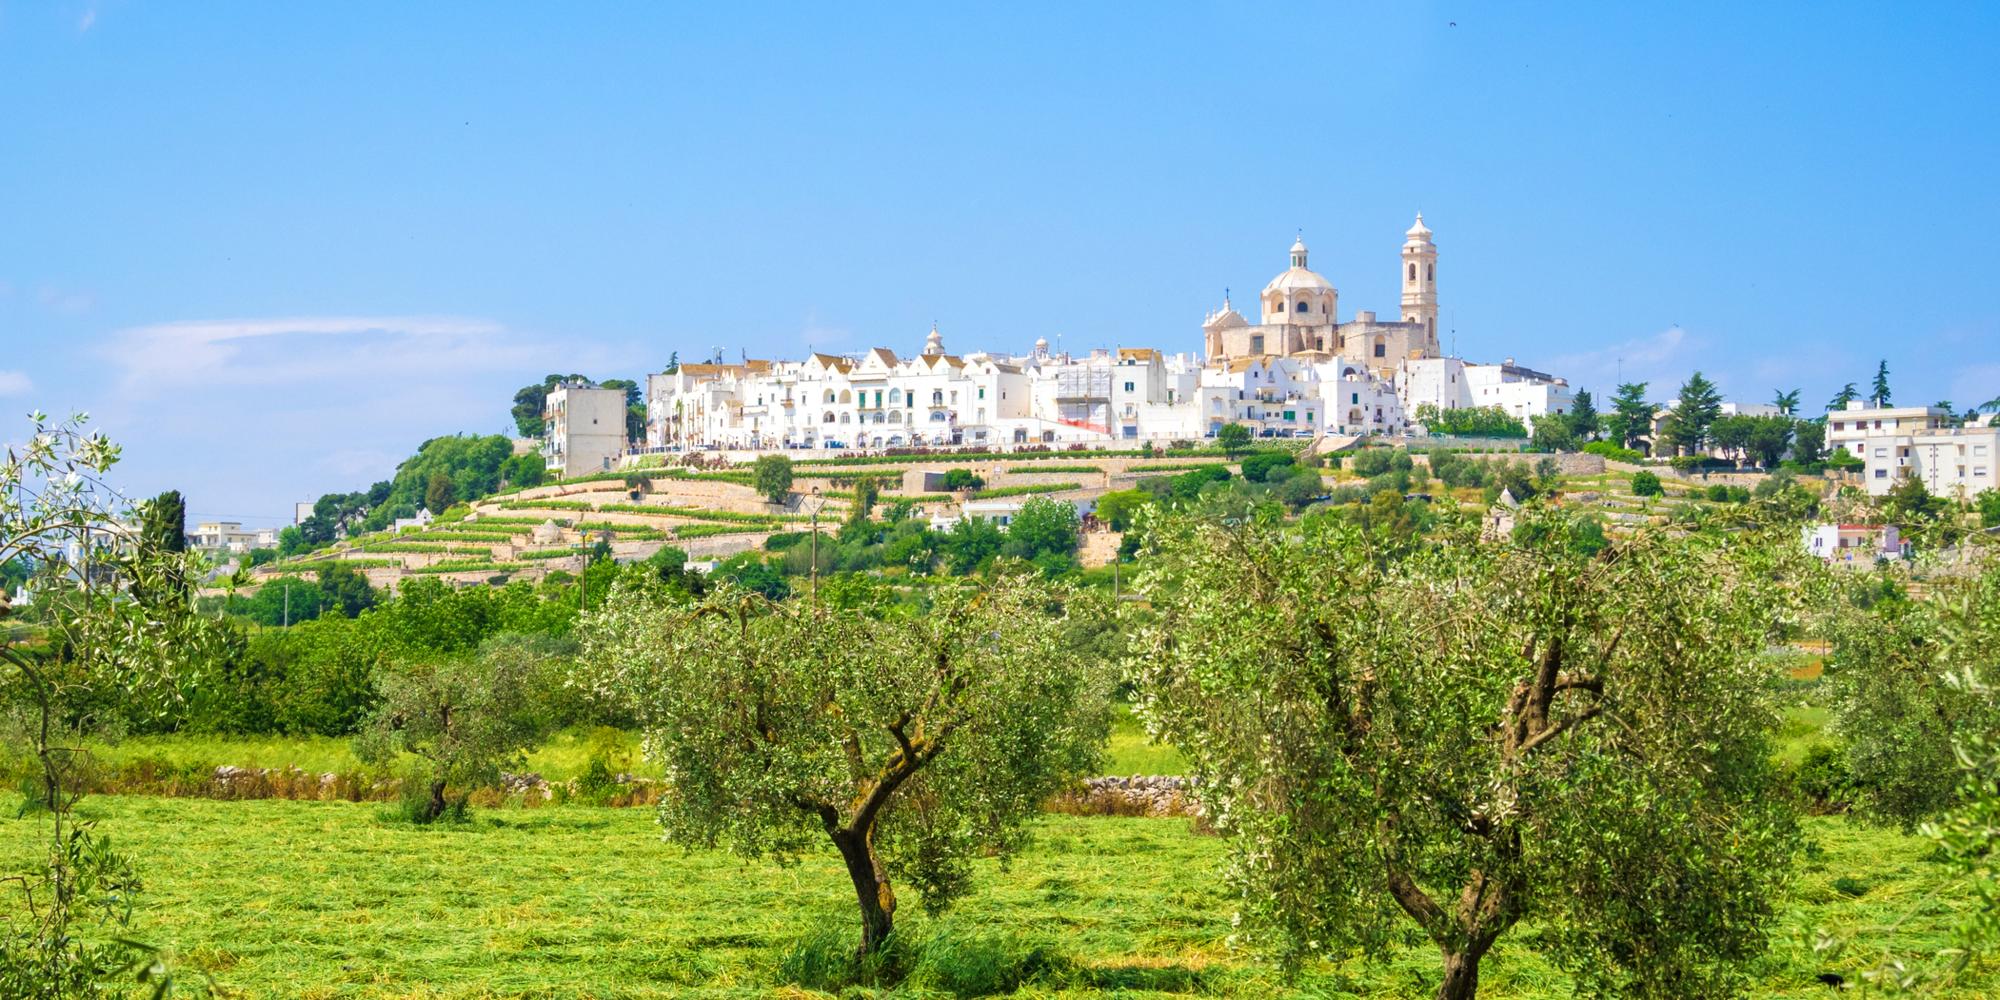 The secluded villages of Puglia